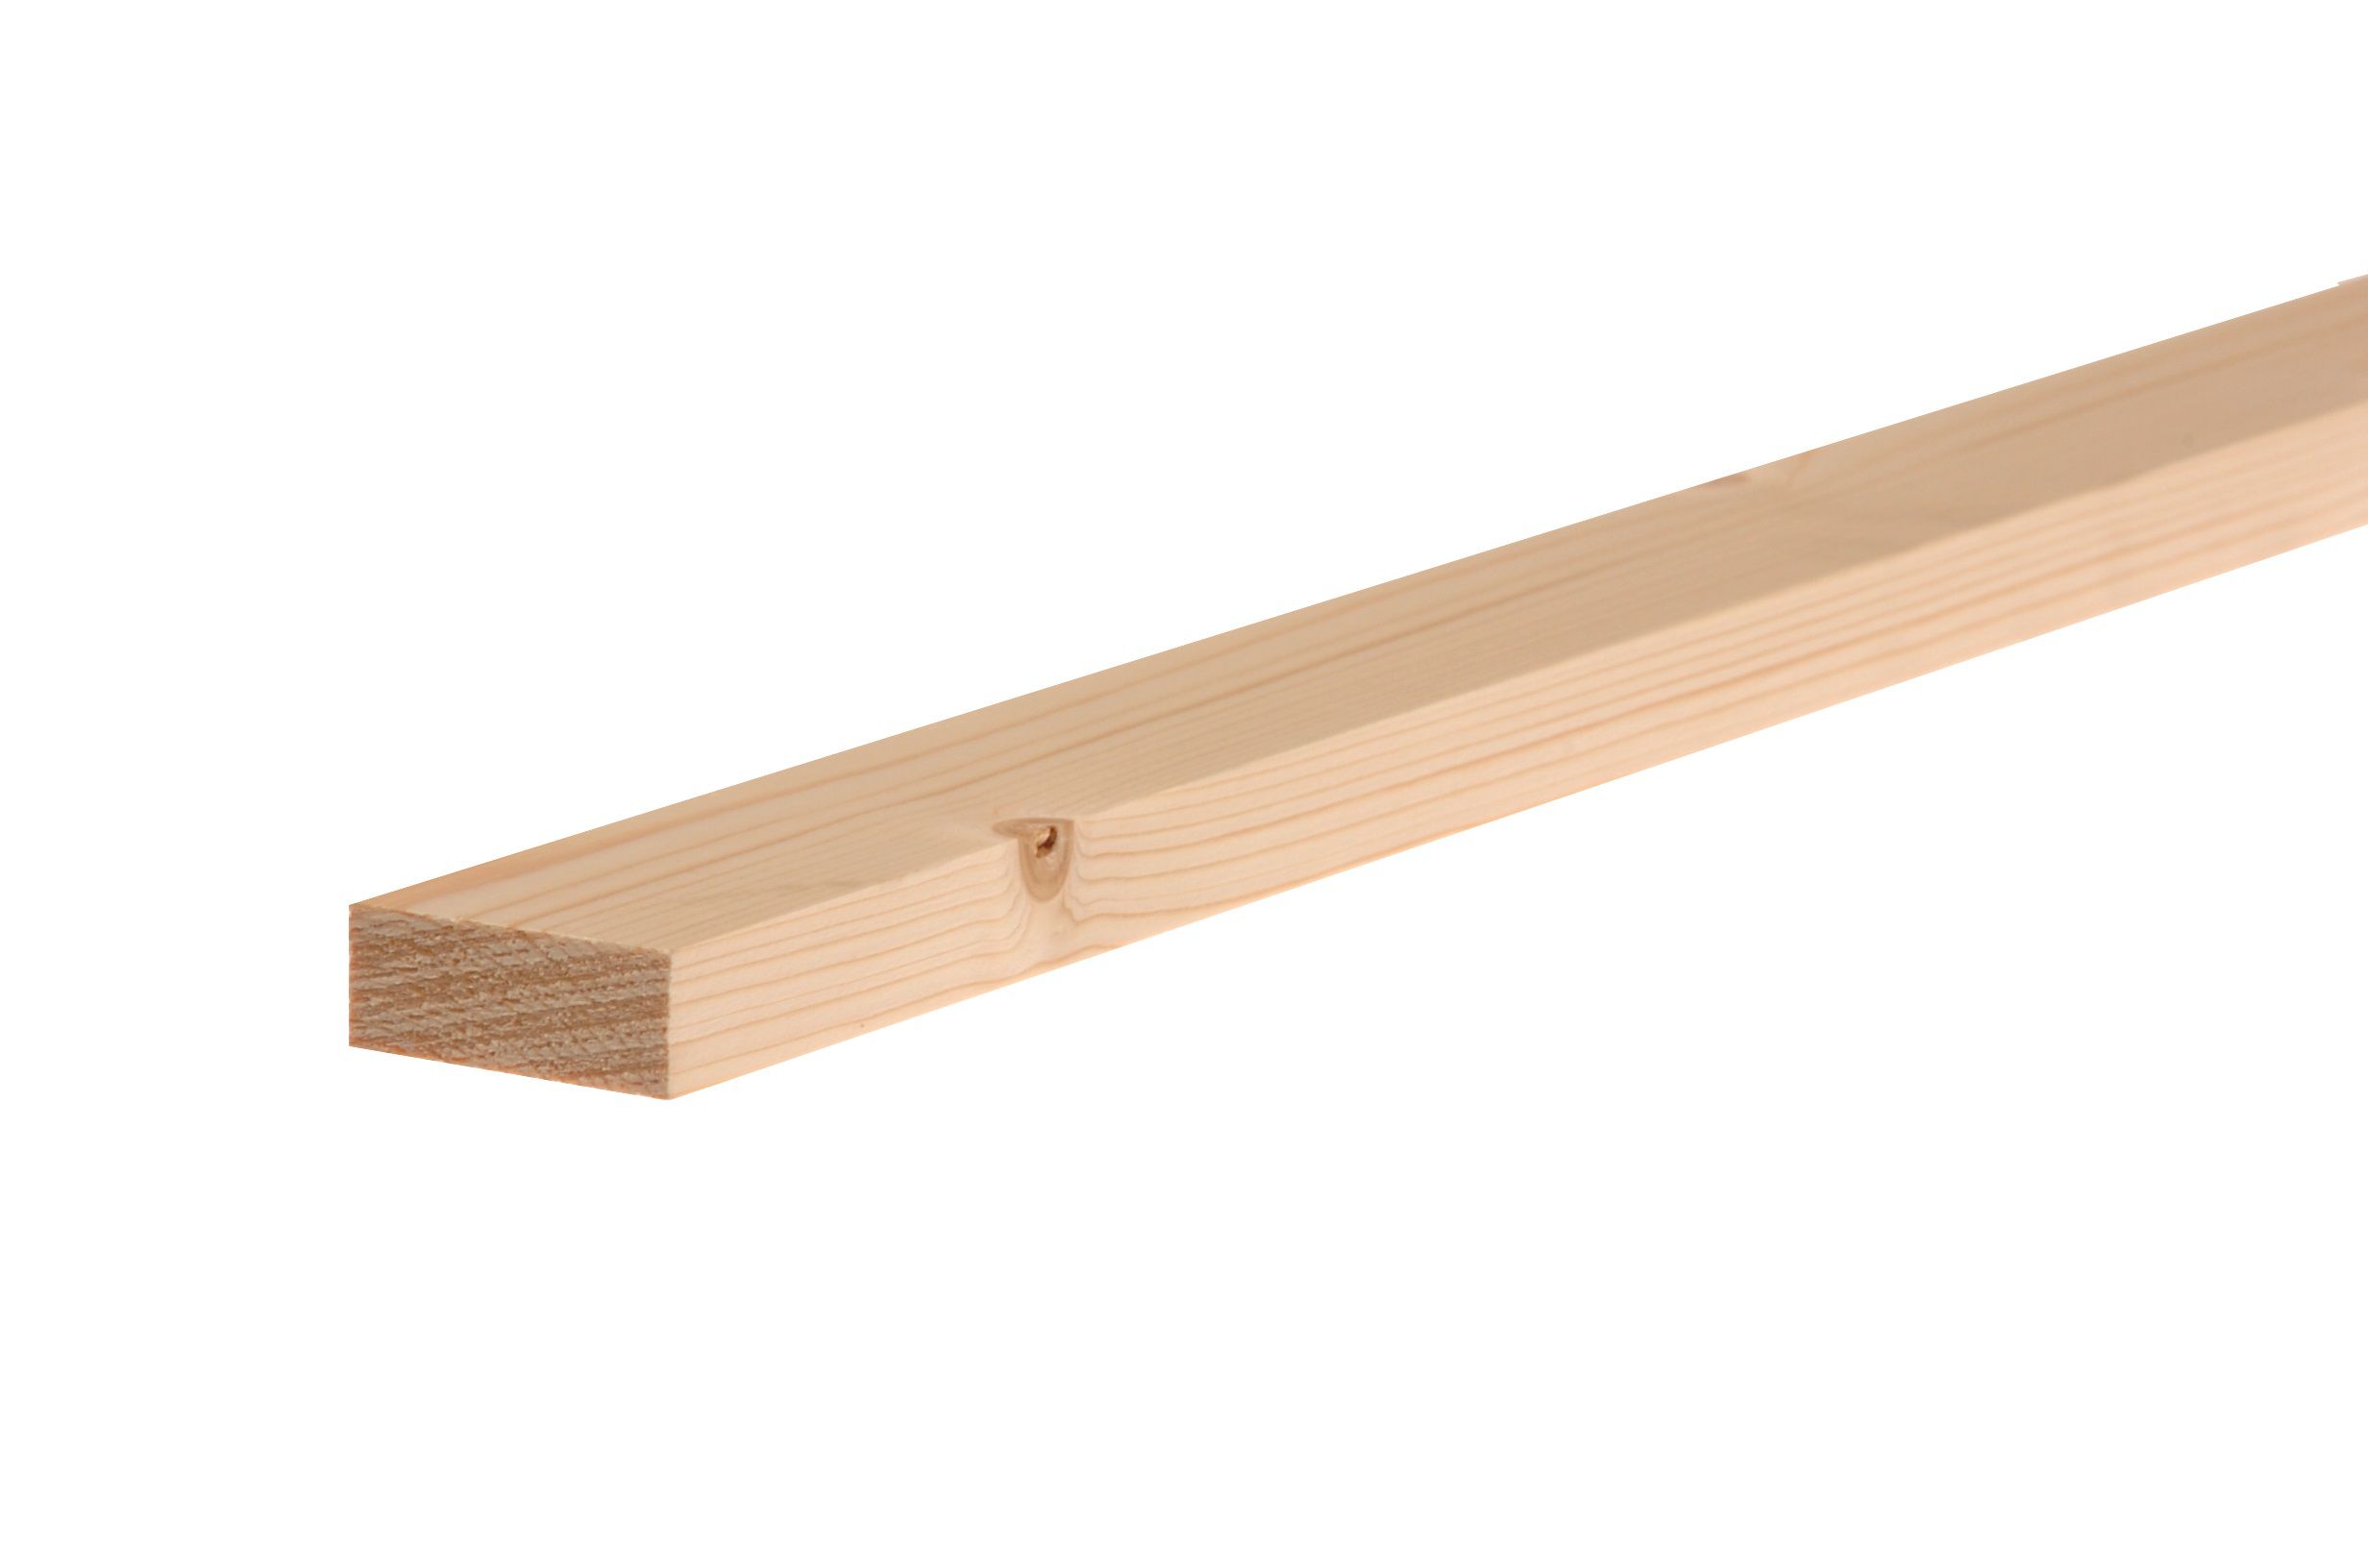 Smooth Planed Square edge Stick timber (L)2.1m (W)44mm (T)12mm